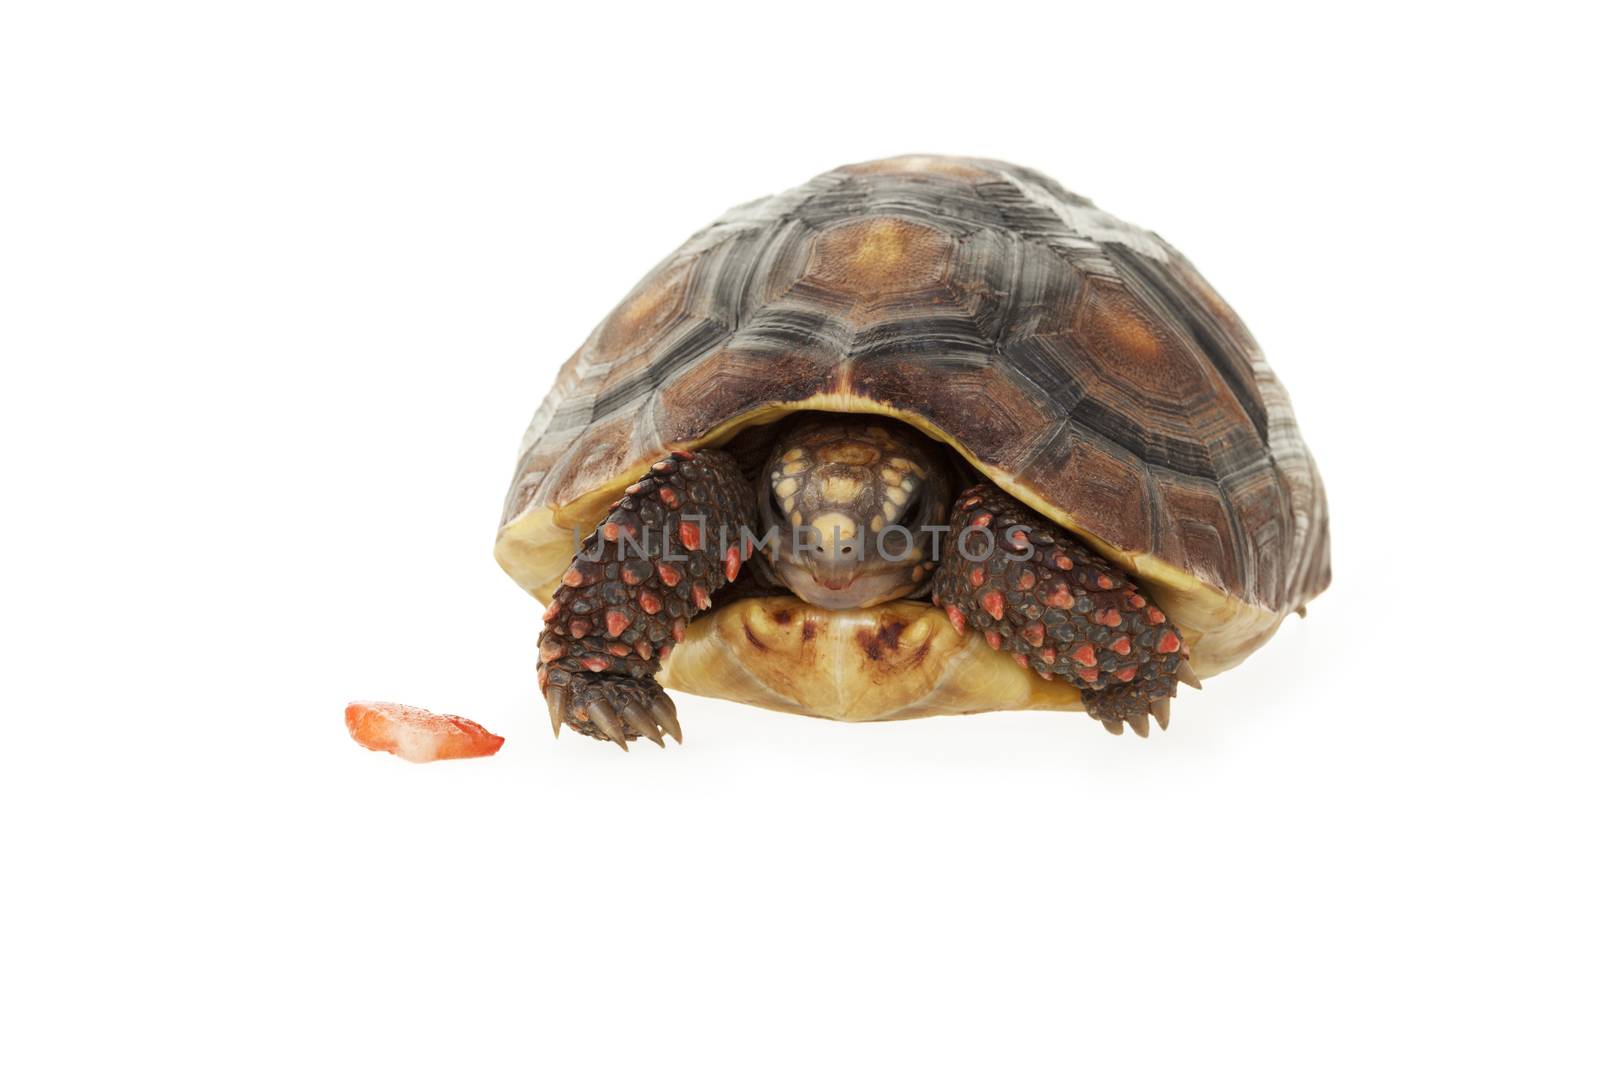 A 2 year old, female, Red- Footed Tortoise partially tucked into her shell with a piece of strawberry next to her.  Shot on white background.